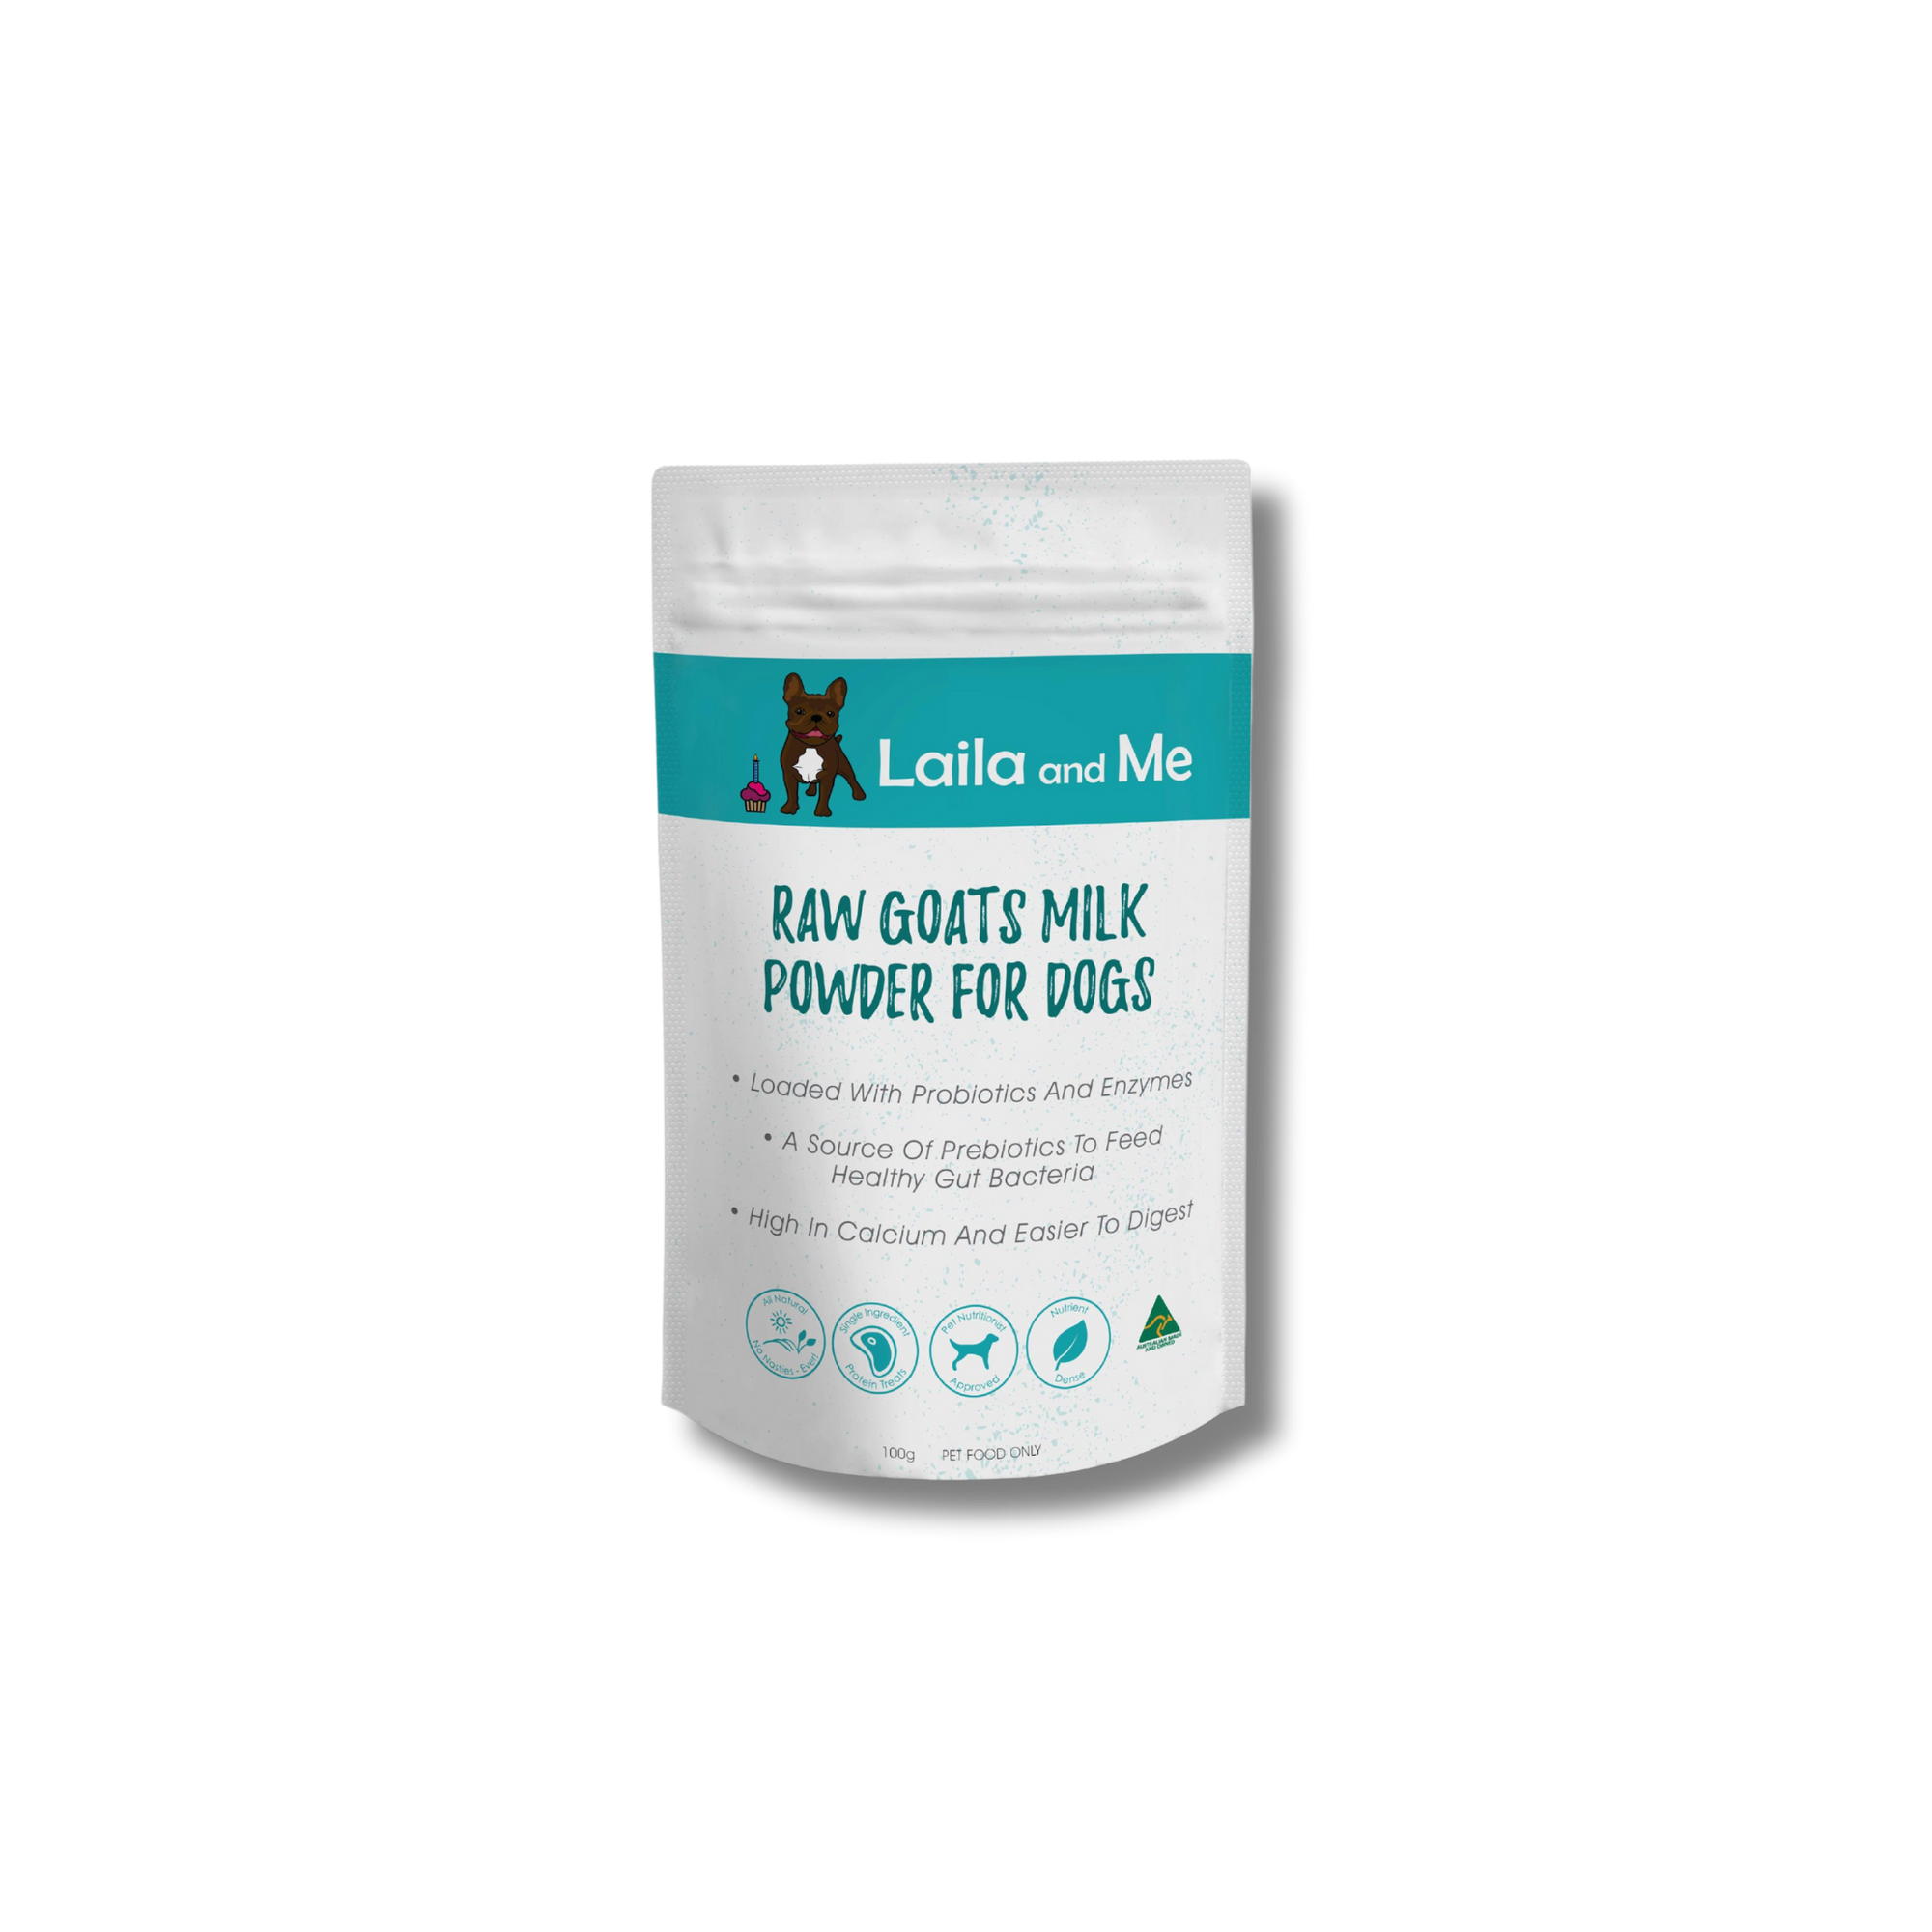 Raw Goats Milk Powder for Dogs - Laila and Me